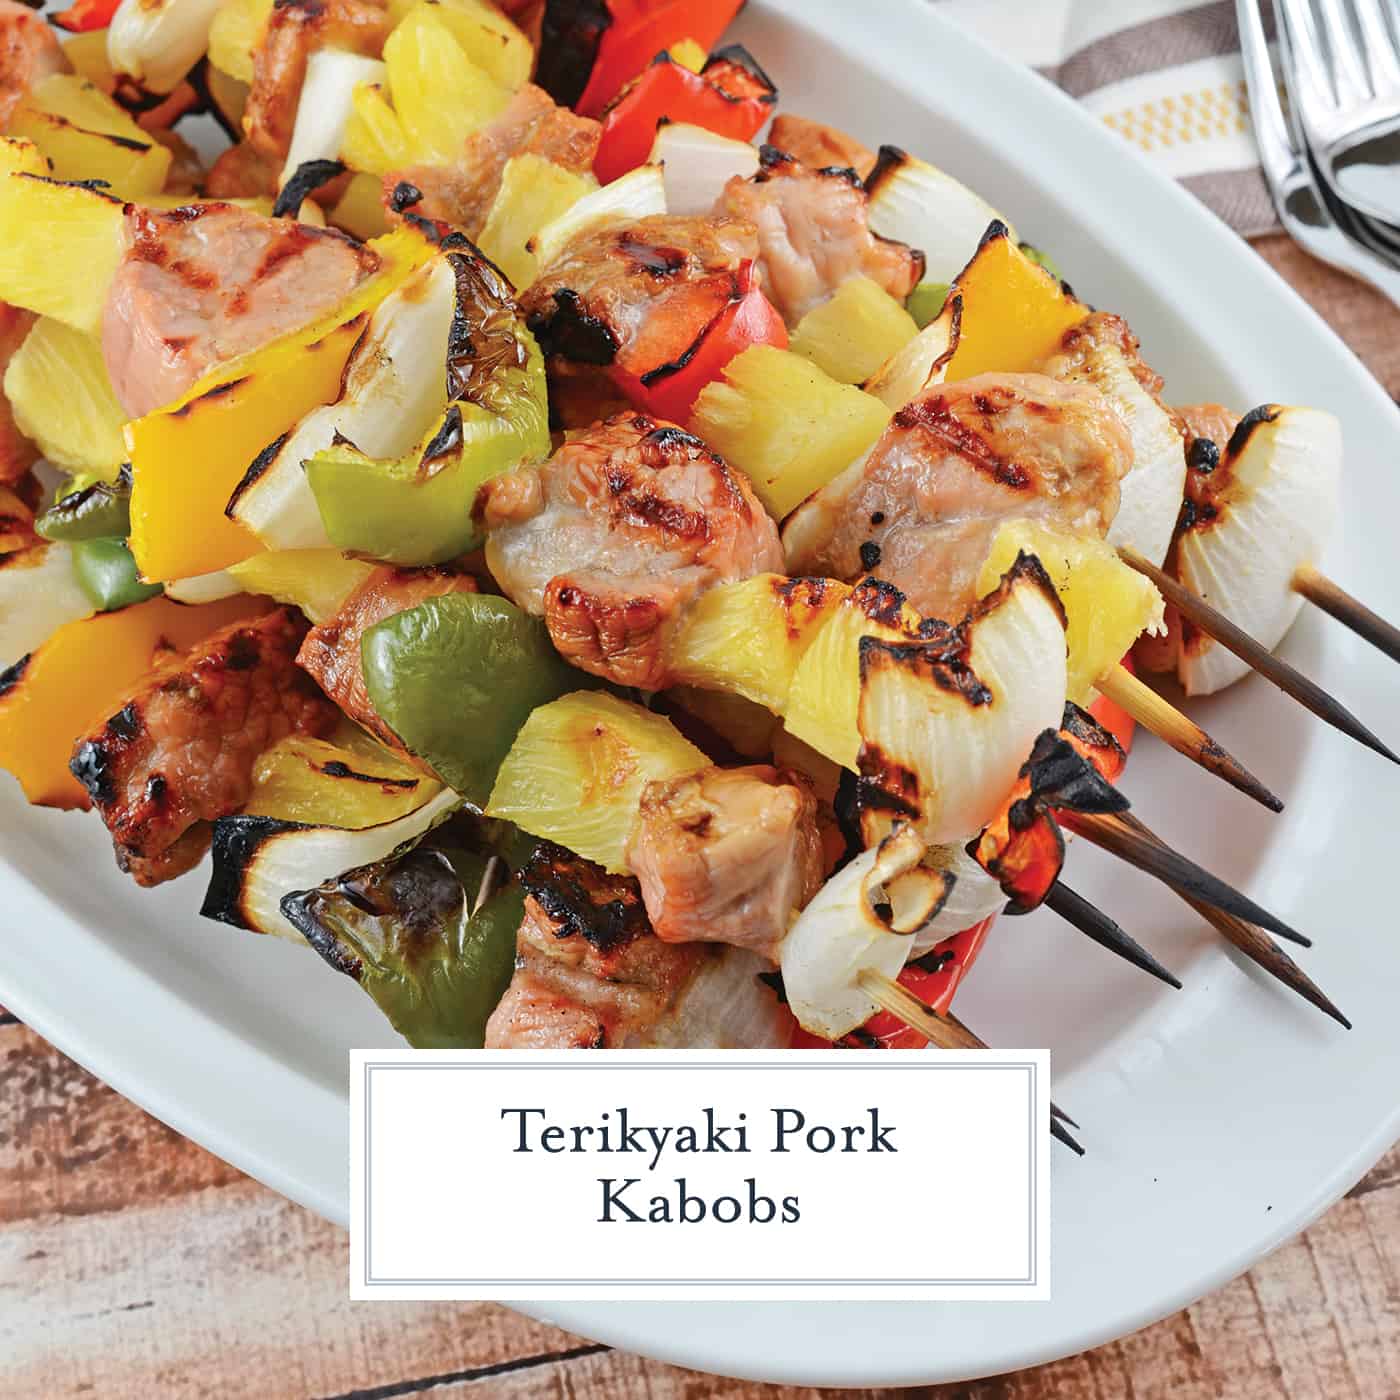 Teriyaki Pork Kabobs are an easy kabob recipe using marinated pork tenderloin paired with pineapple, bell pepper and sweet onion. Ready in 30 minutes! #teriyakipork #kabobrecipes www.savoryexperiments.com